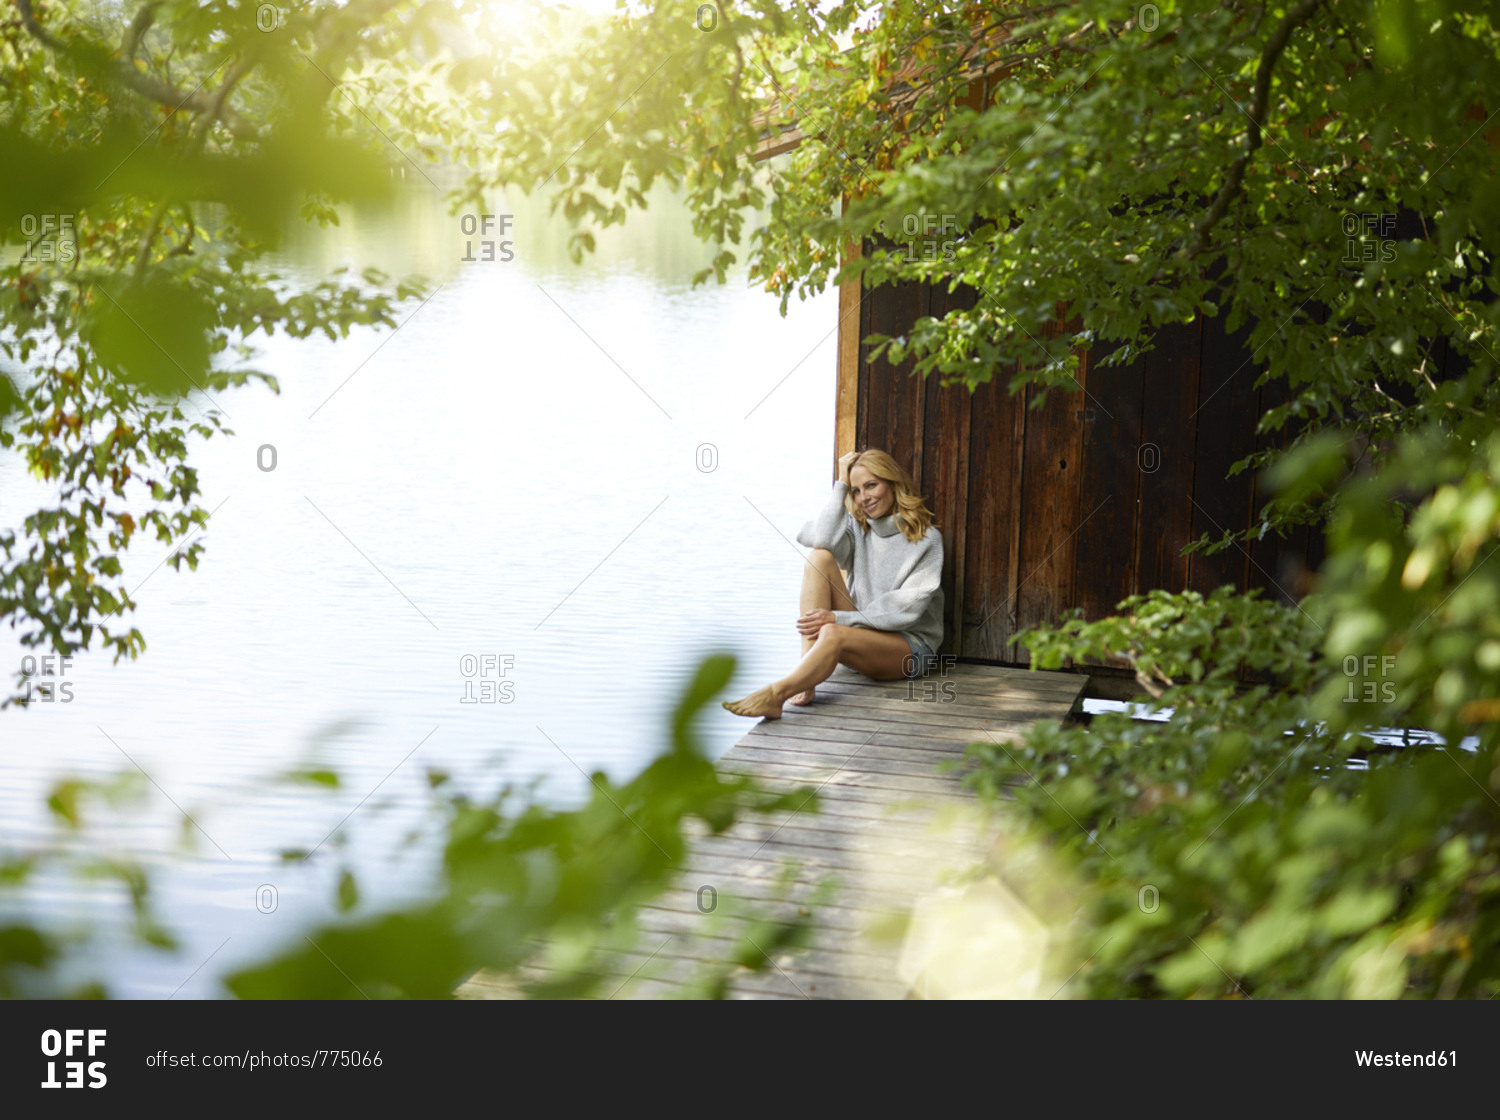 Relaxed woman sitting on wooden jetty at a remote lake